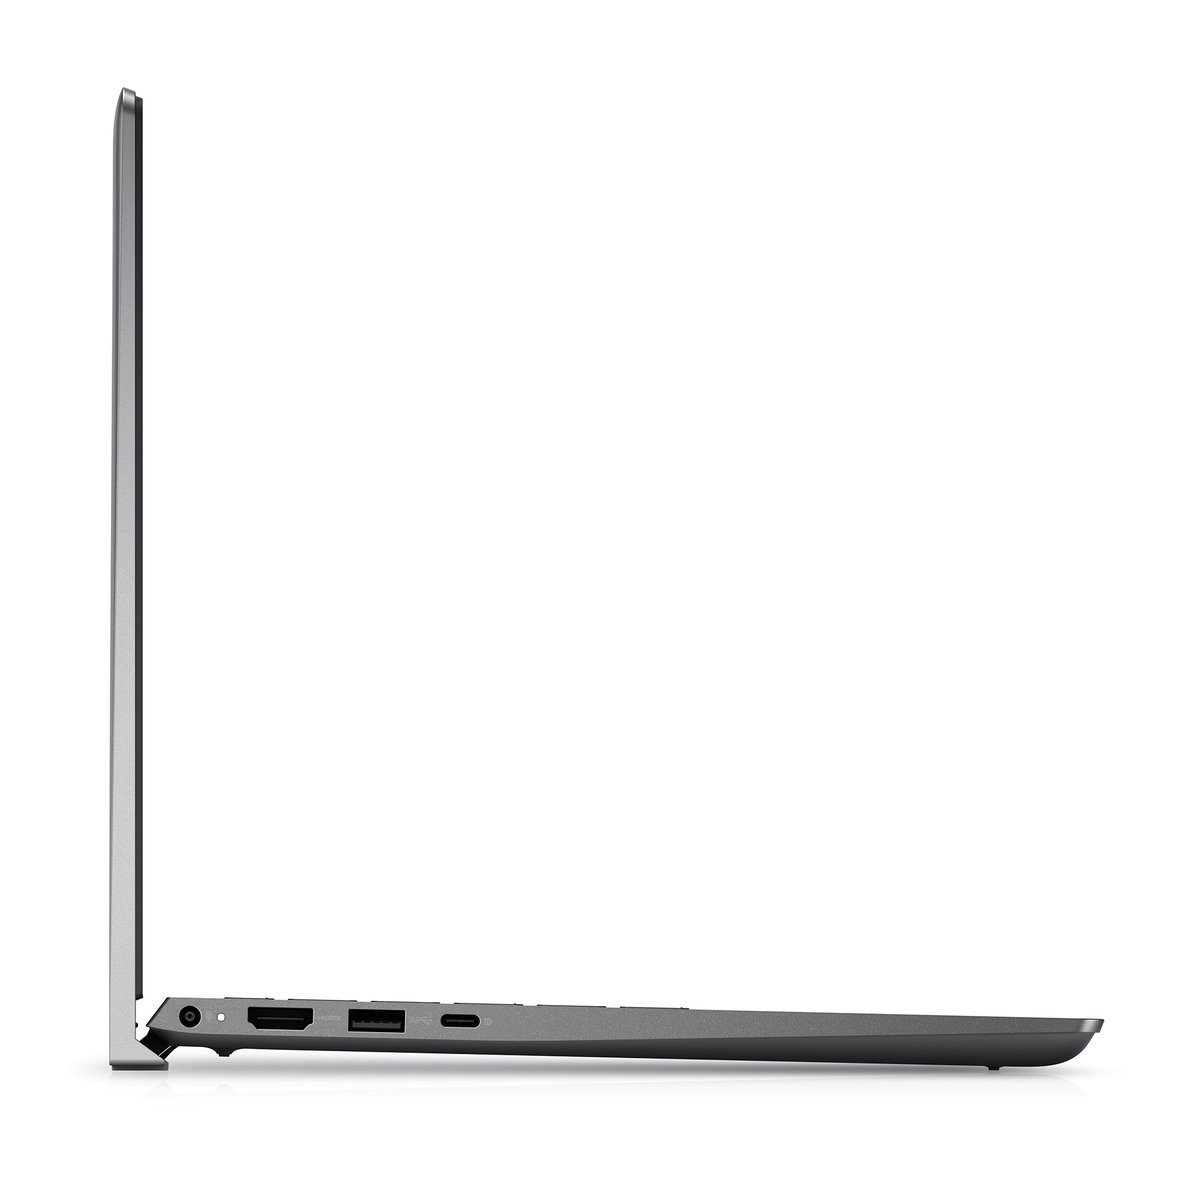 Dell Vostro 5410 Laptop,Intel Core i5-11300H,8GB RAM,512 GB SSD,VRAM NVIDIA  GeForce MX450 with 2GB  graphics,14.5inches FHD+ Display, Win10,Grey-[5410-VOS-4002-GRY]